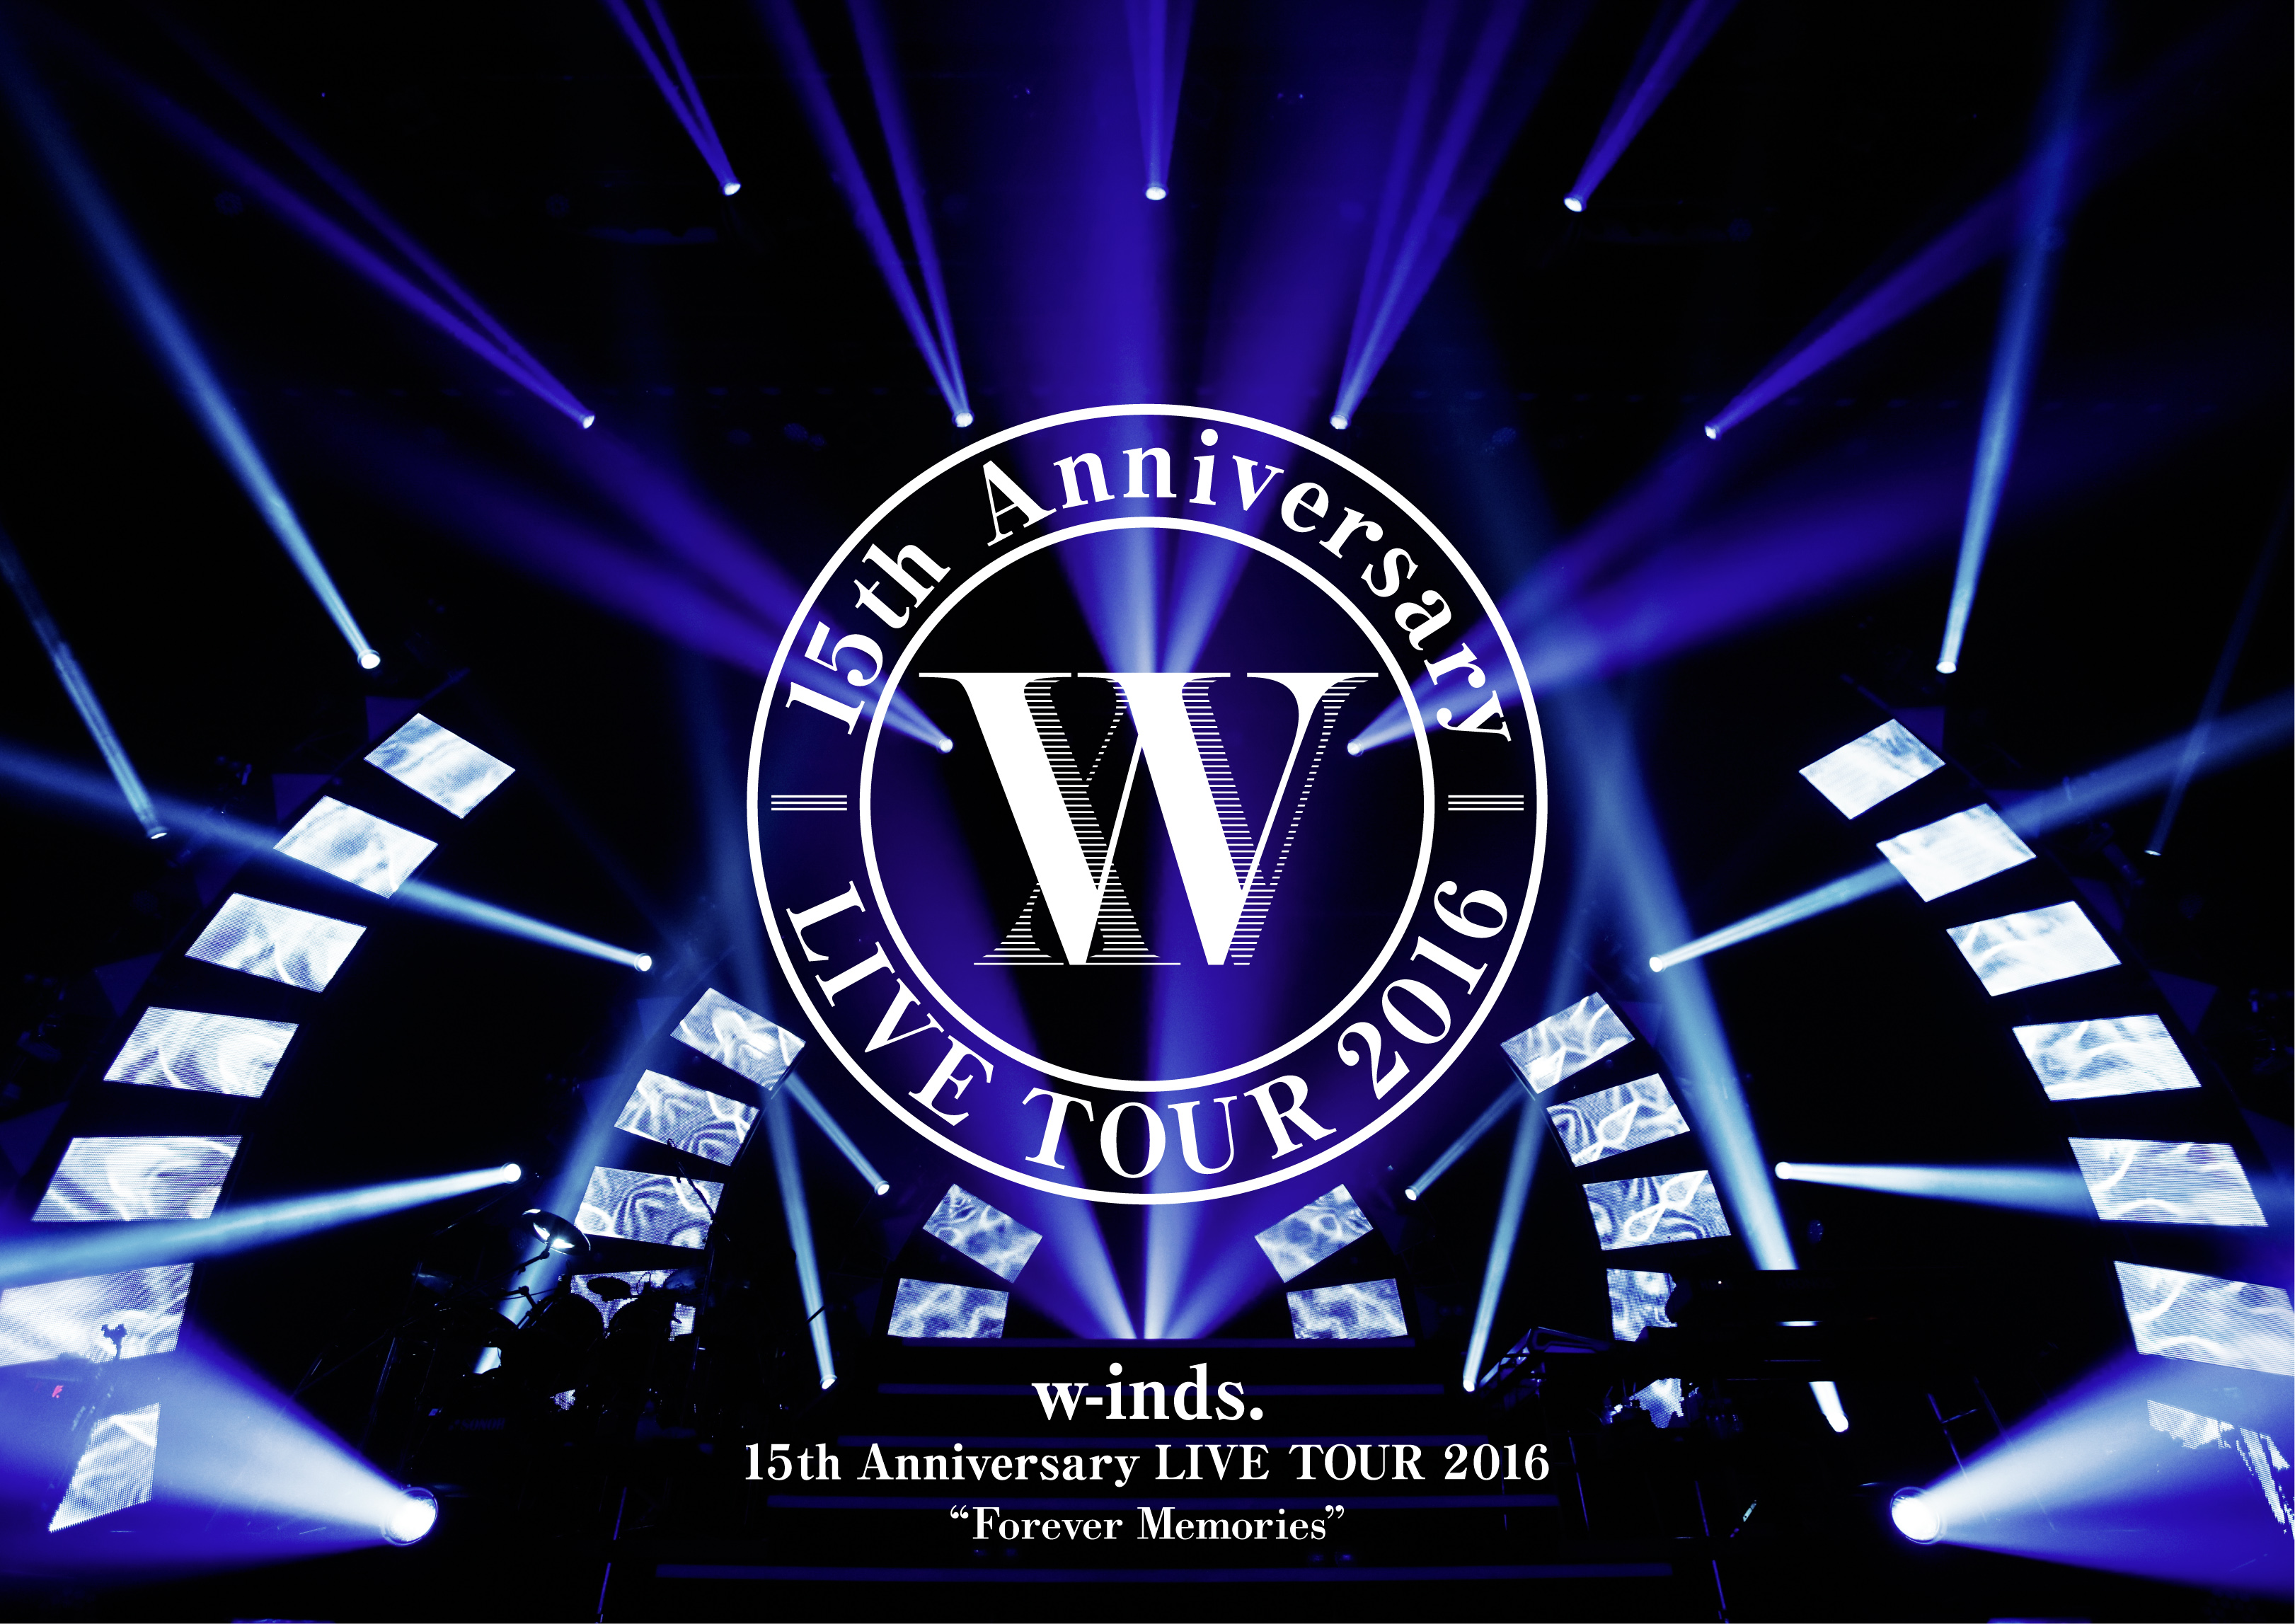 w-inds. 15th Anniversary LIVE TOUR 2016 “Forever Memories”